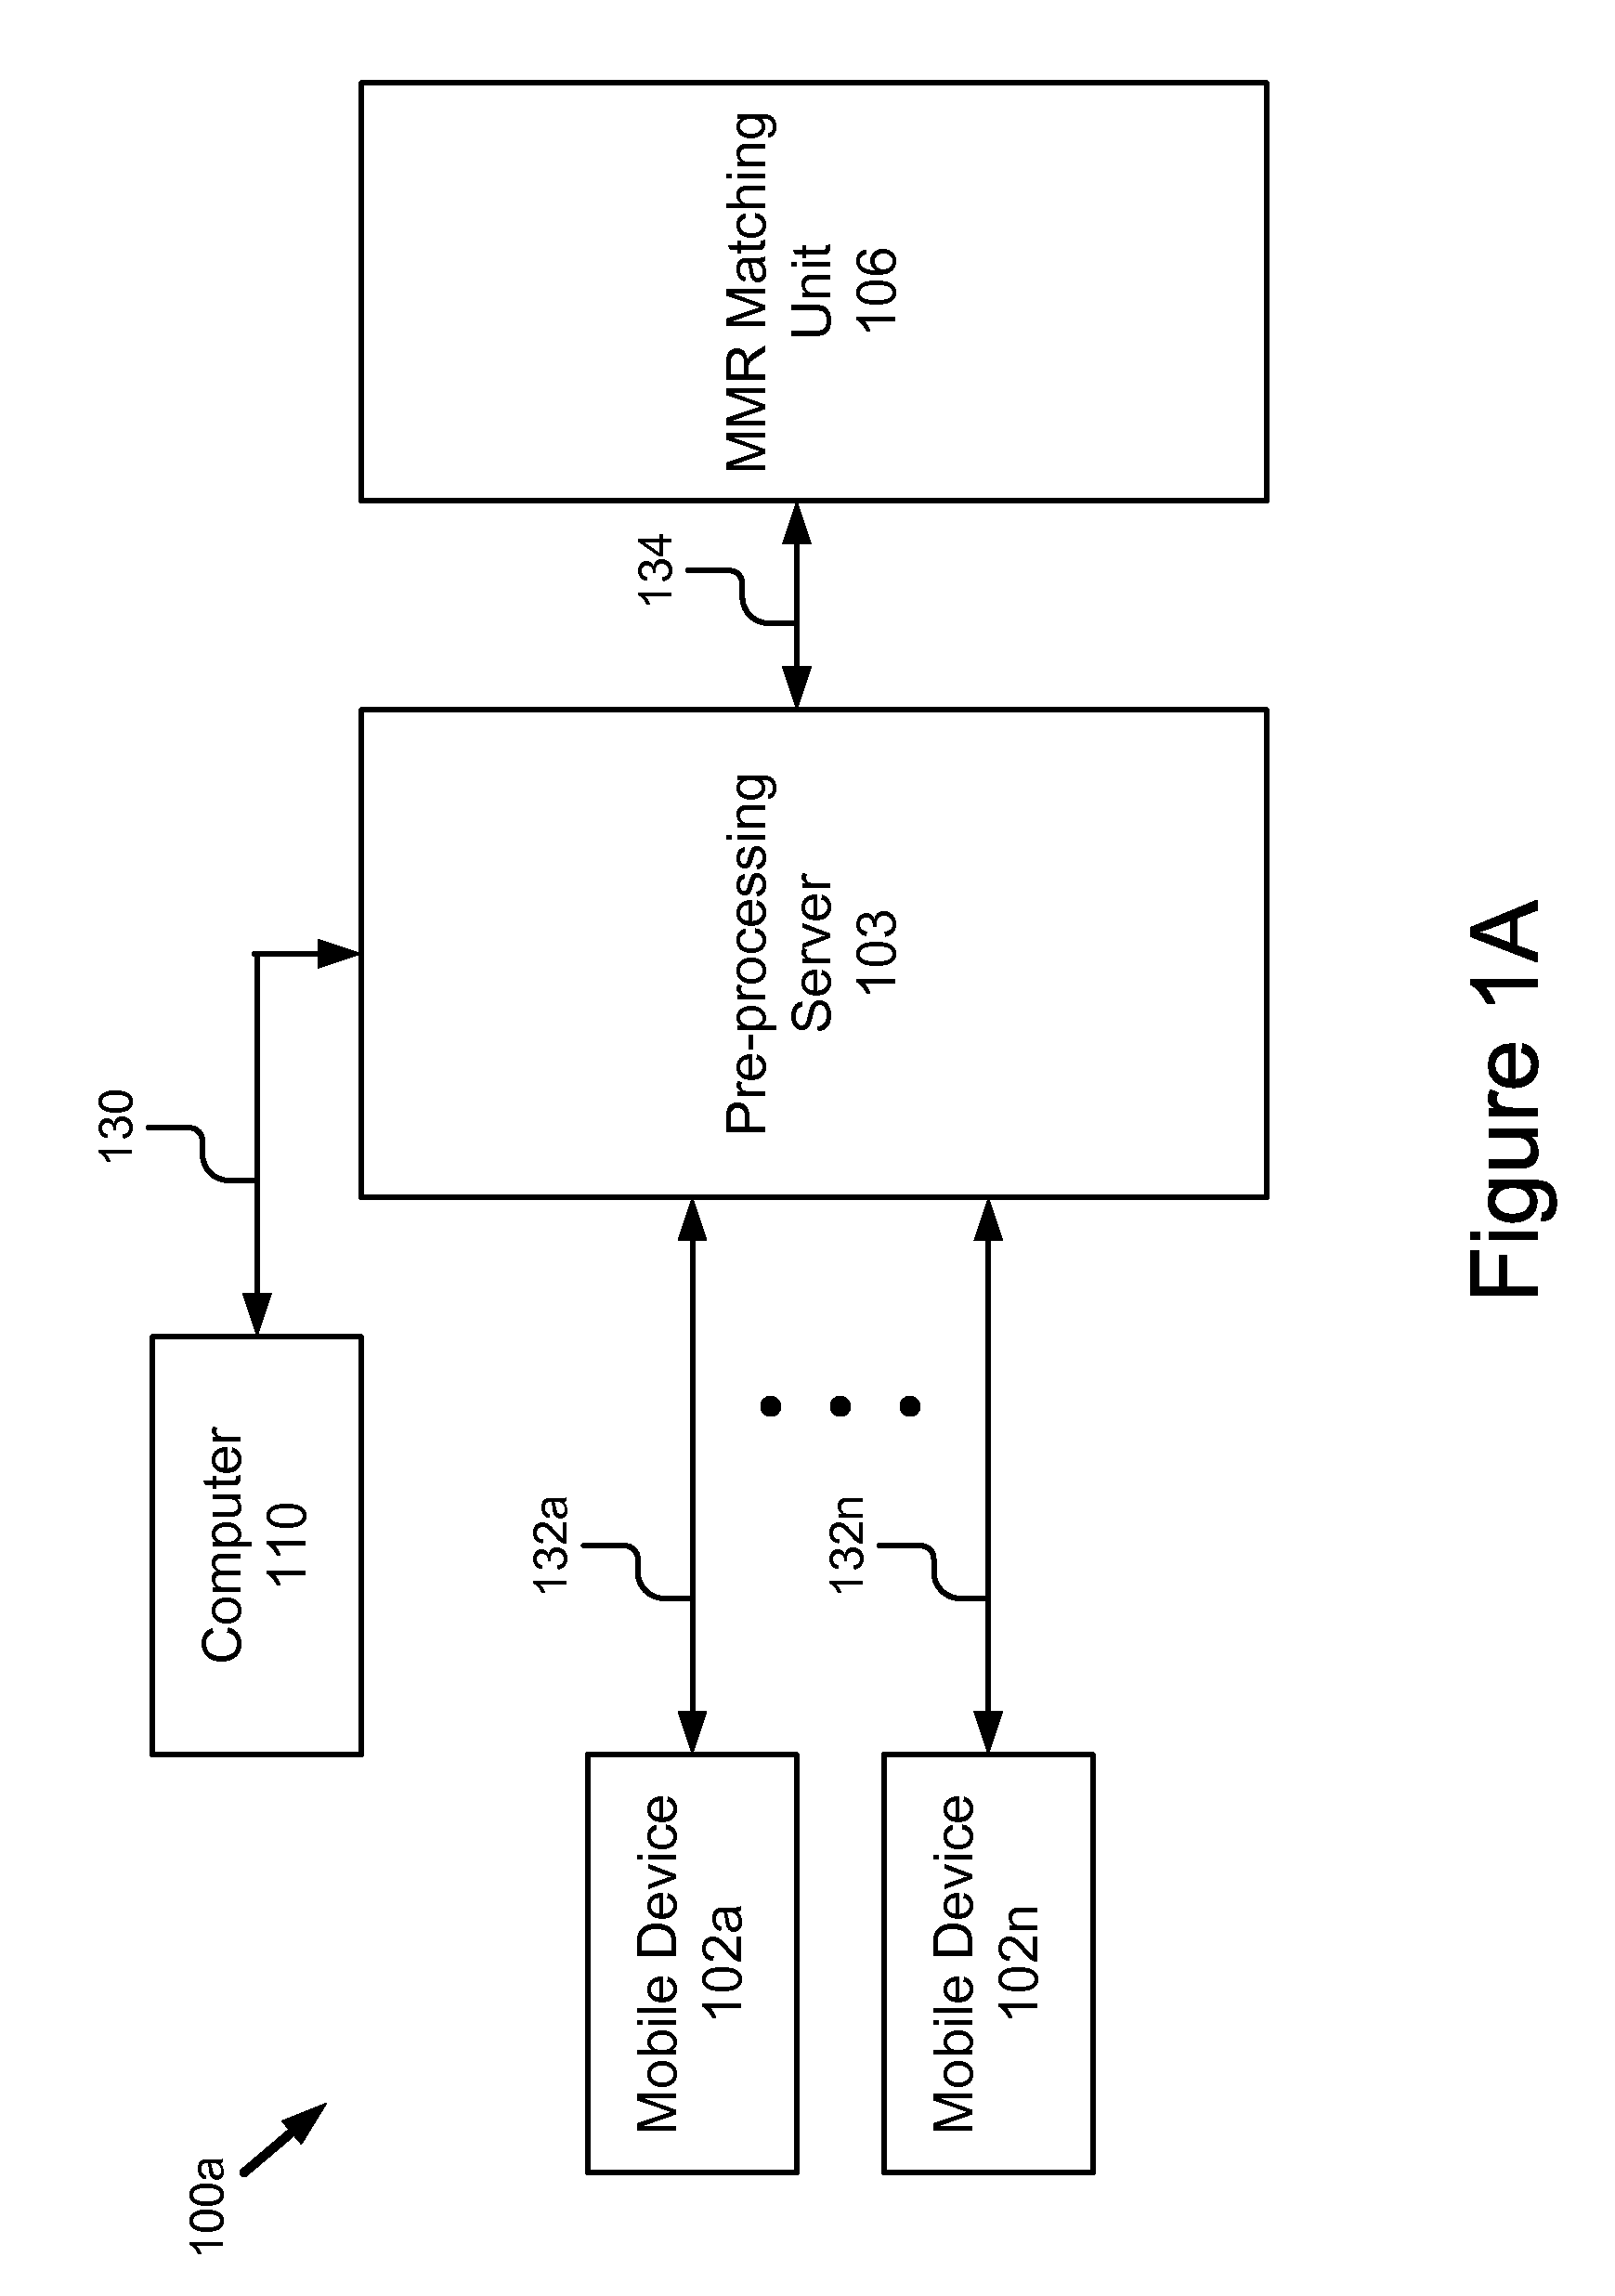 Multi-classifier selection and monitoring for MMR-based image recognition